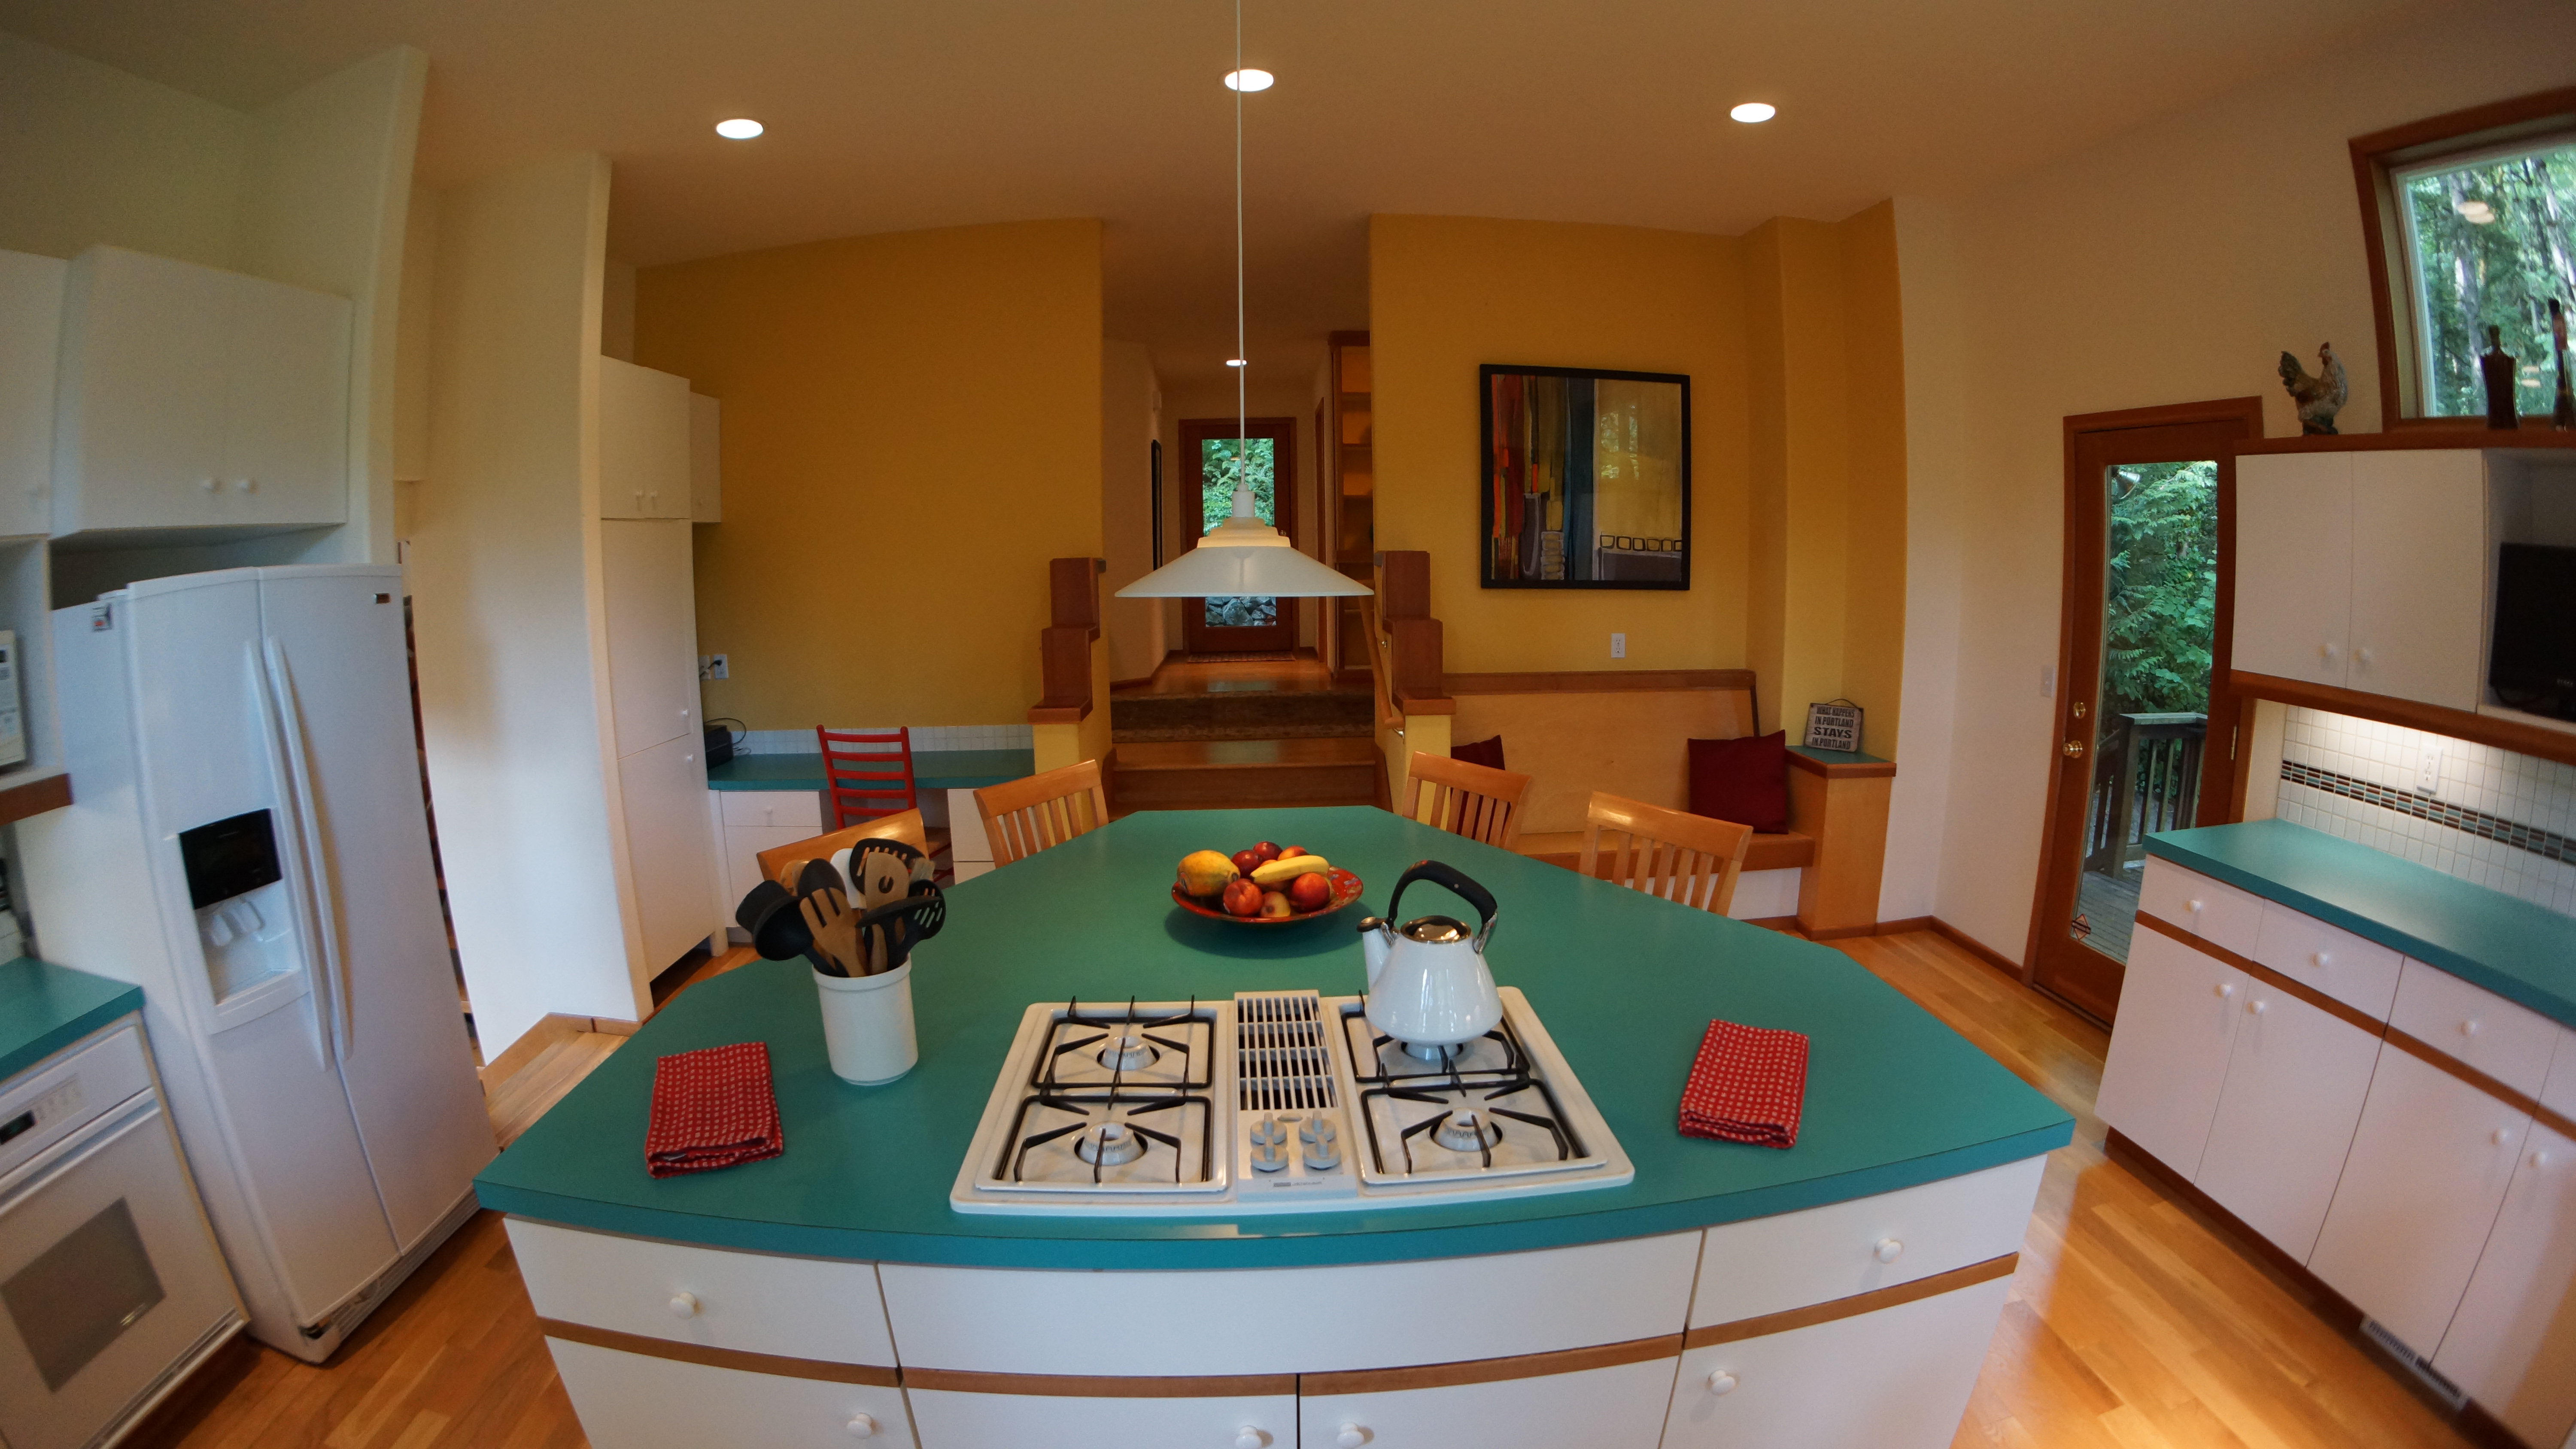 High Ceilings, Great Views & <BR>Center Cooking Island with Surround Seating.